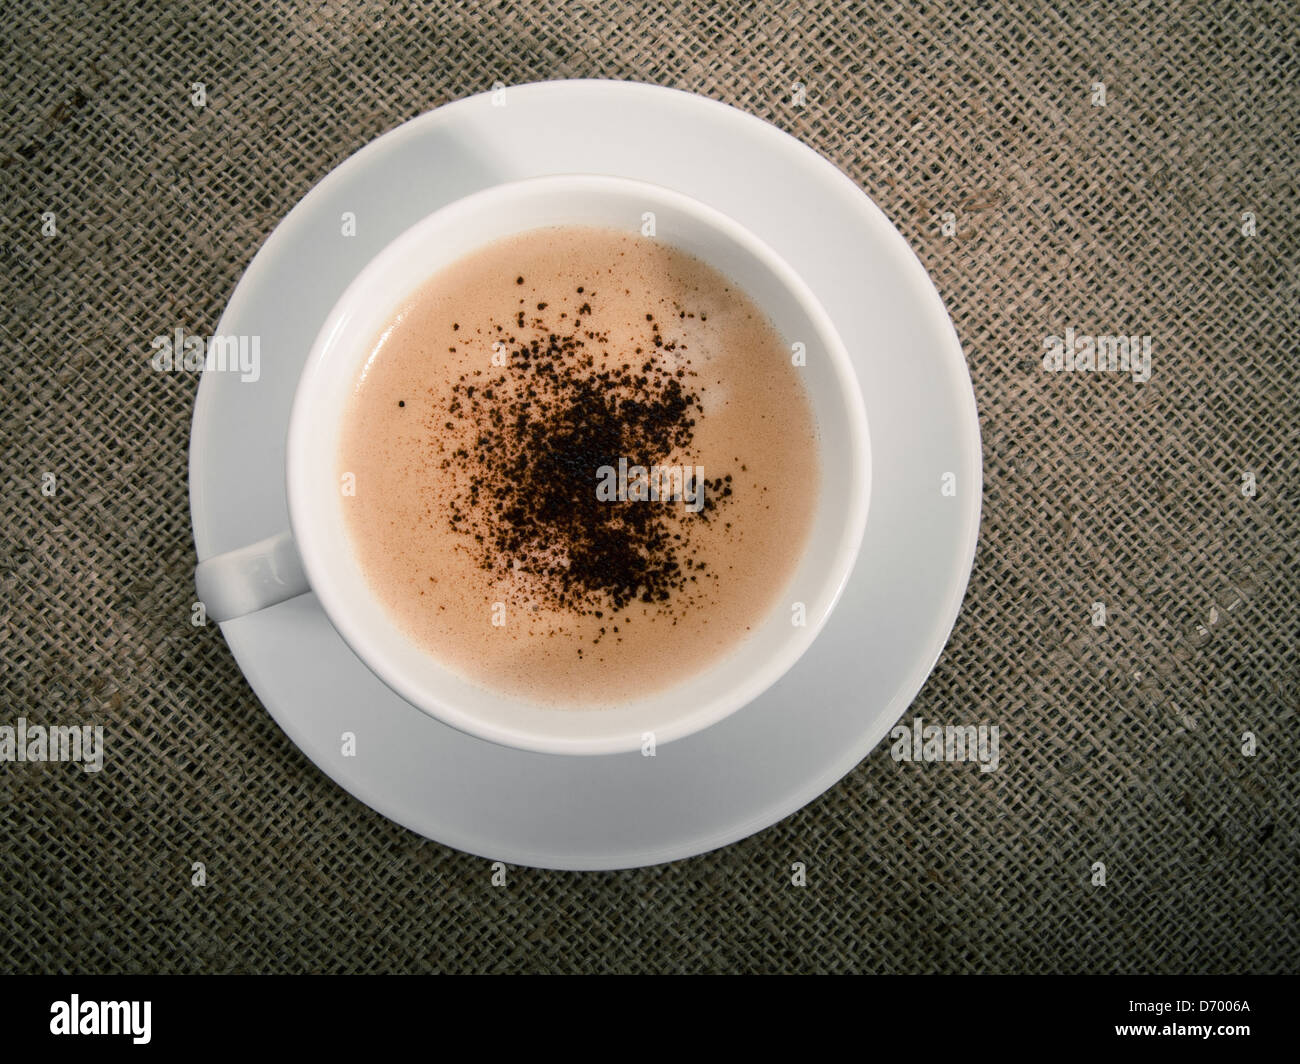 Black coffee over old burlap background Stock Photo